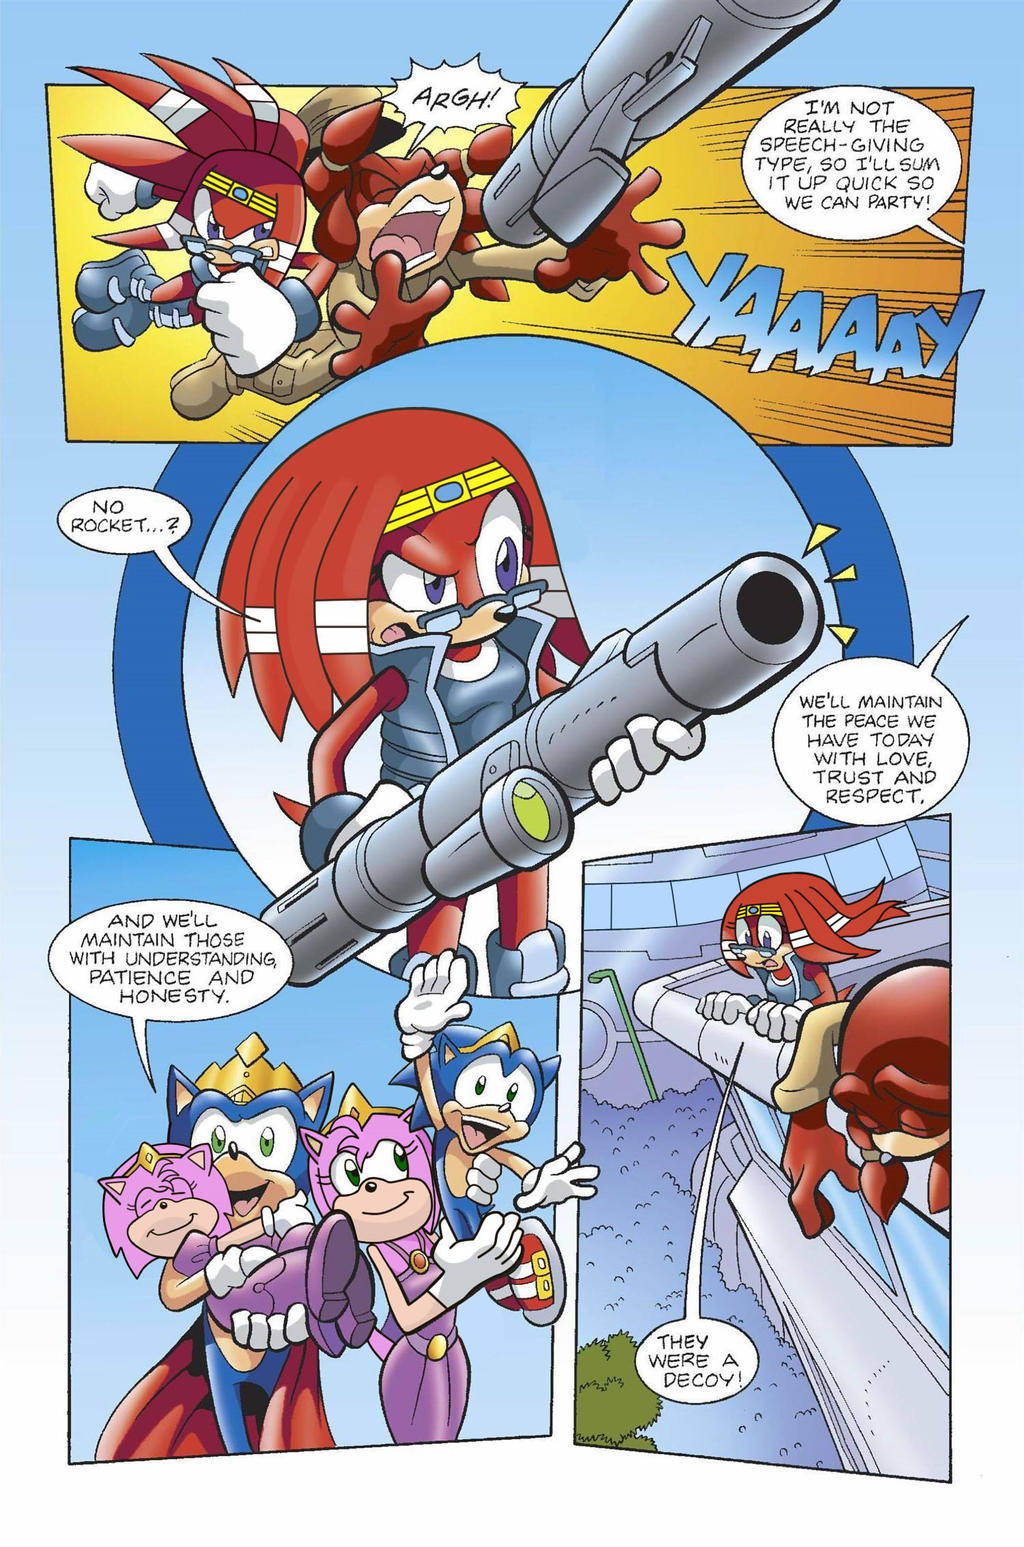 Sonamy Channel on X: Classic Sonic going solo: Expected. Classic Knuckles  and Classic Amy teaming up: Watch Out! #SonicOrigins   / X